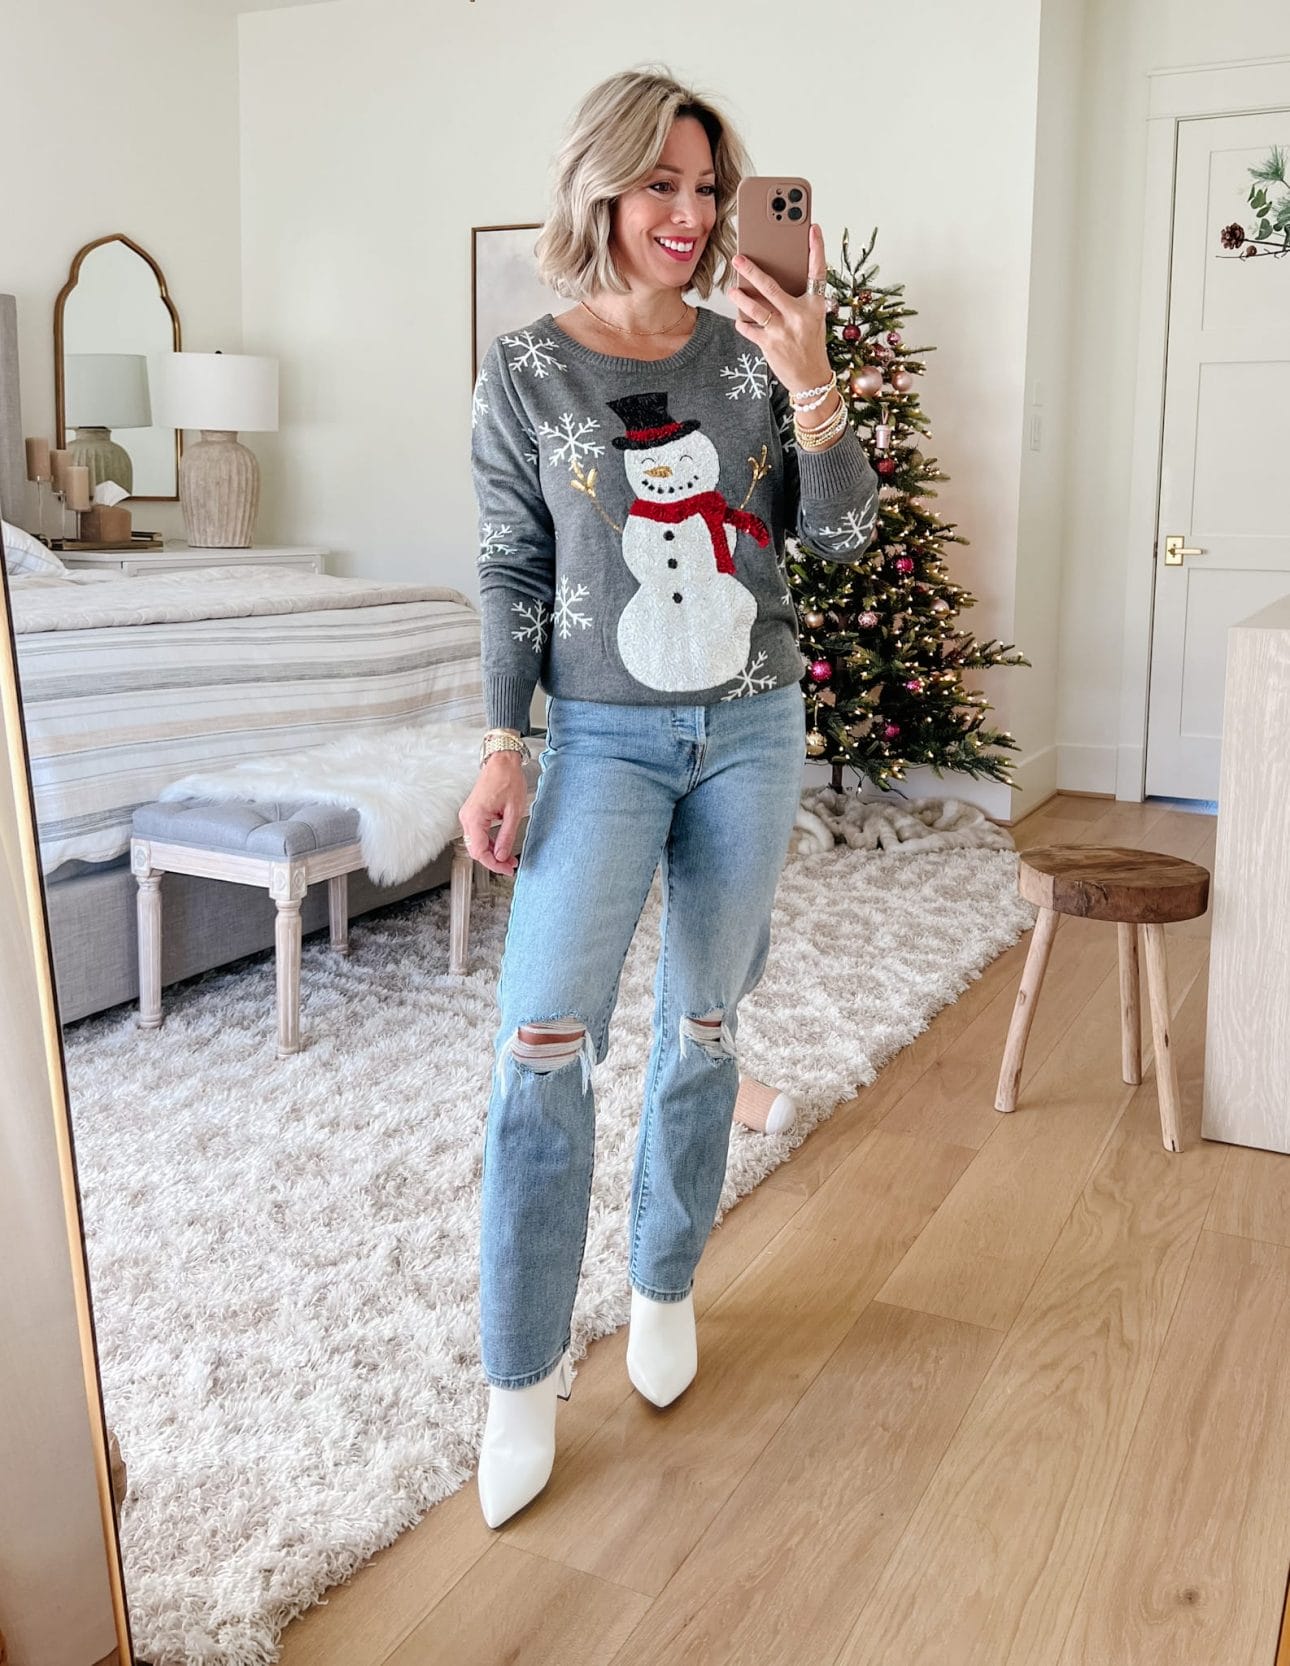 Snowman Sweater, Jeans, white Booties